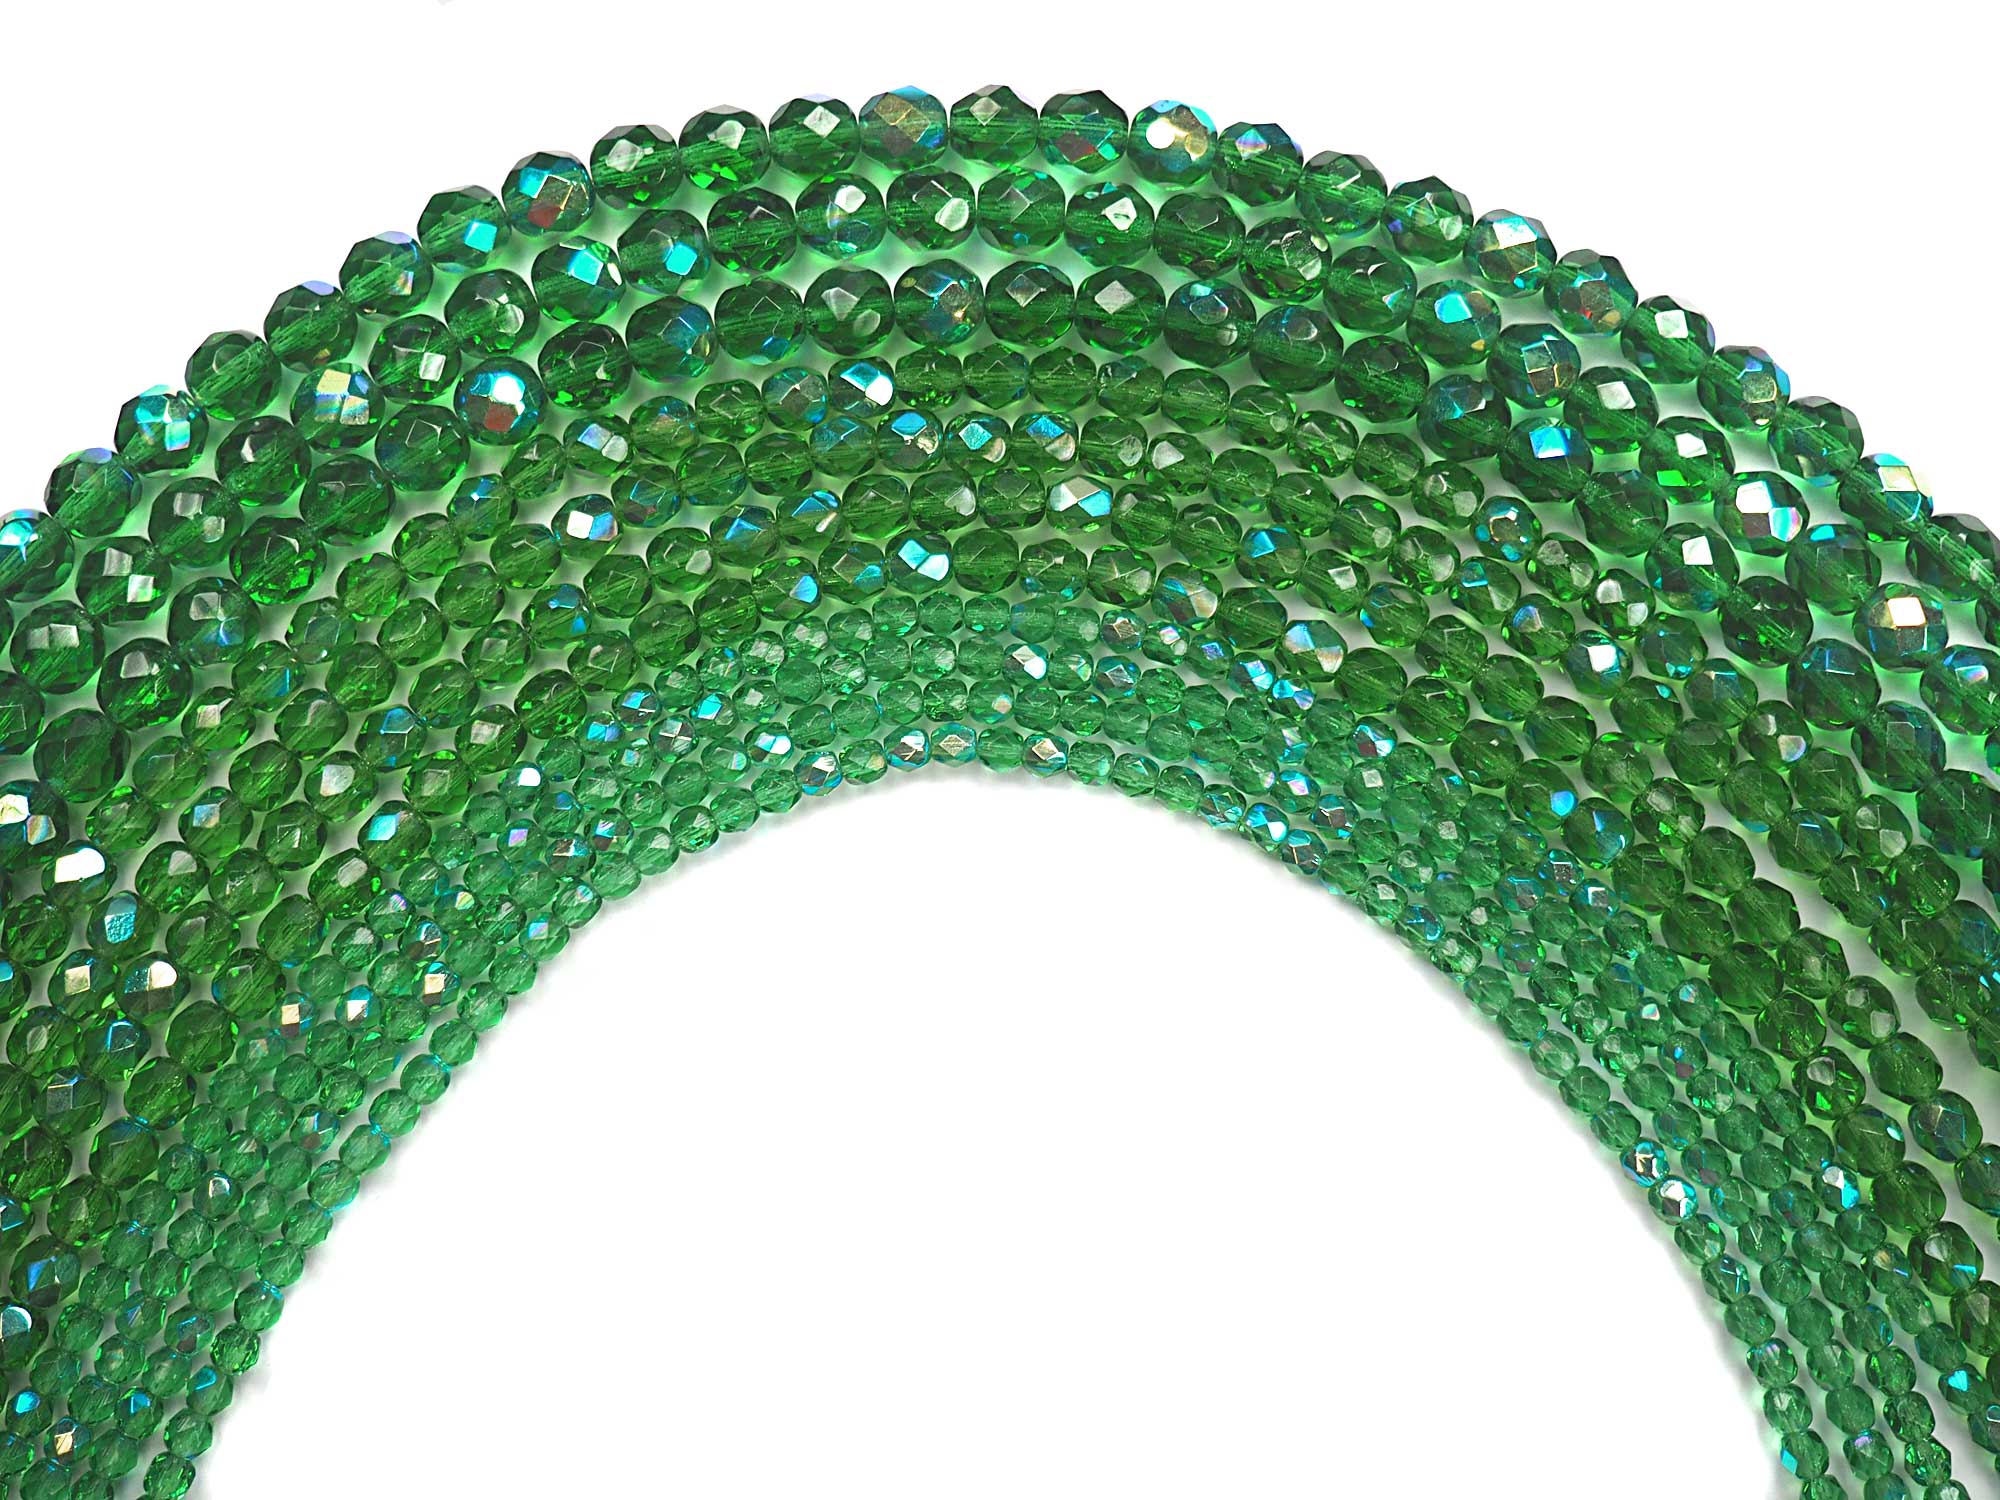 Shamrock Spring Green AB coated, Czech Fire Polished Round Faceted Glass Beads, 16 inch strands